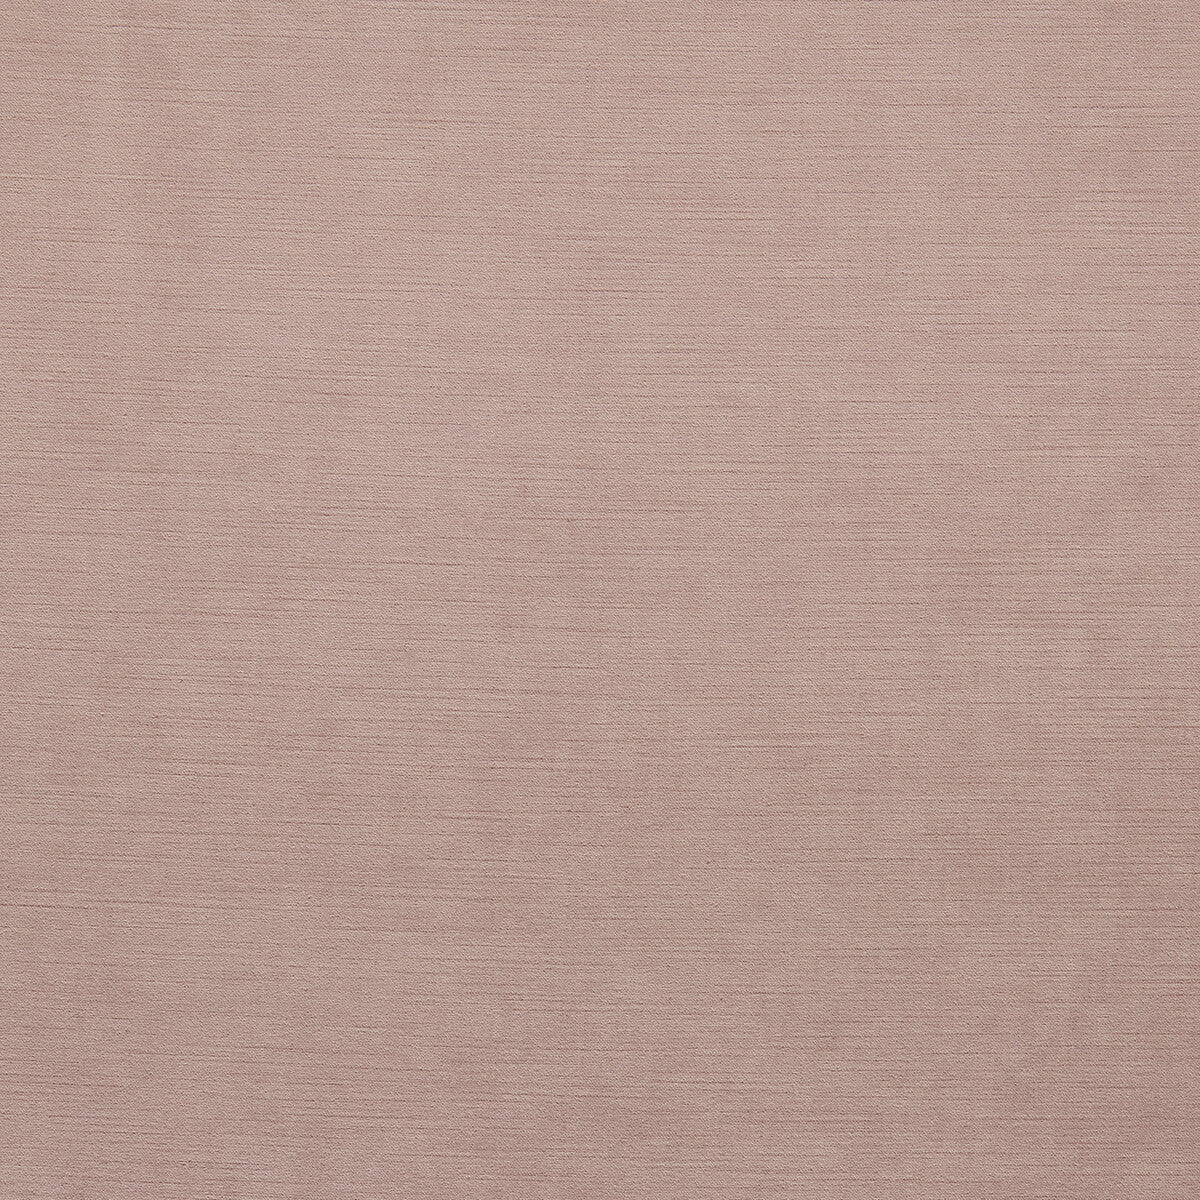 Riva fabric in blush color - pattern F1583/03.CAC.0 - by Clarke And Clarke in the Clarke &amp; Clarke Riva collection